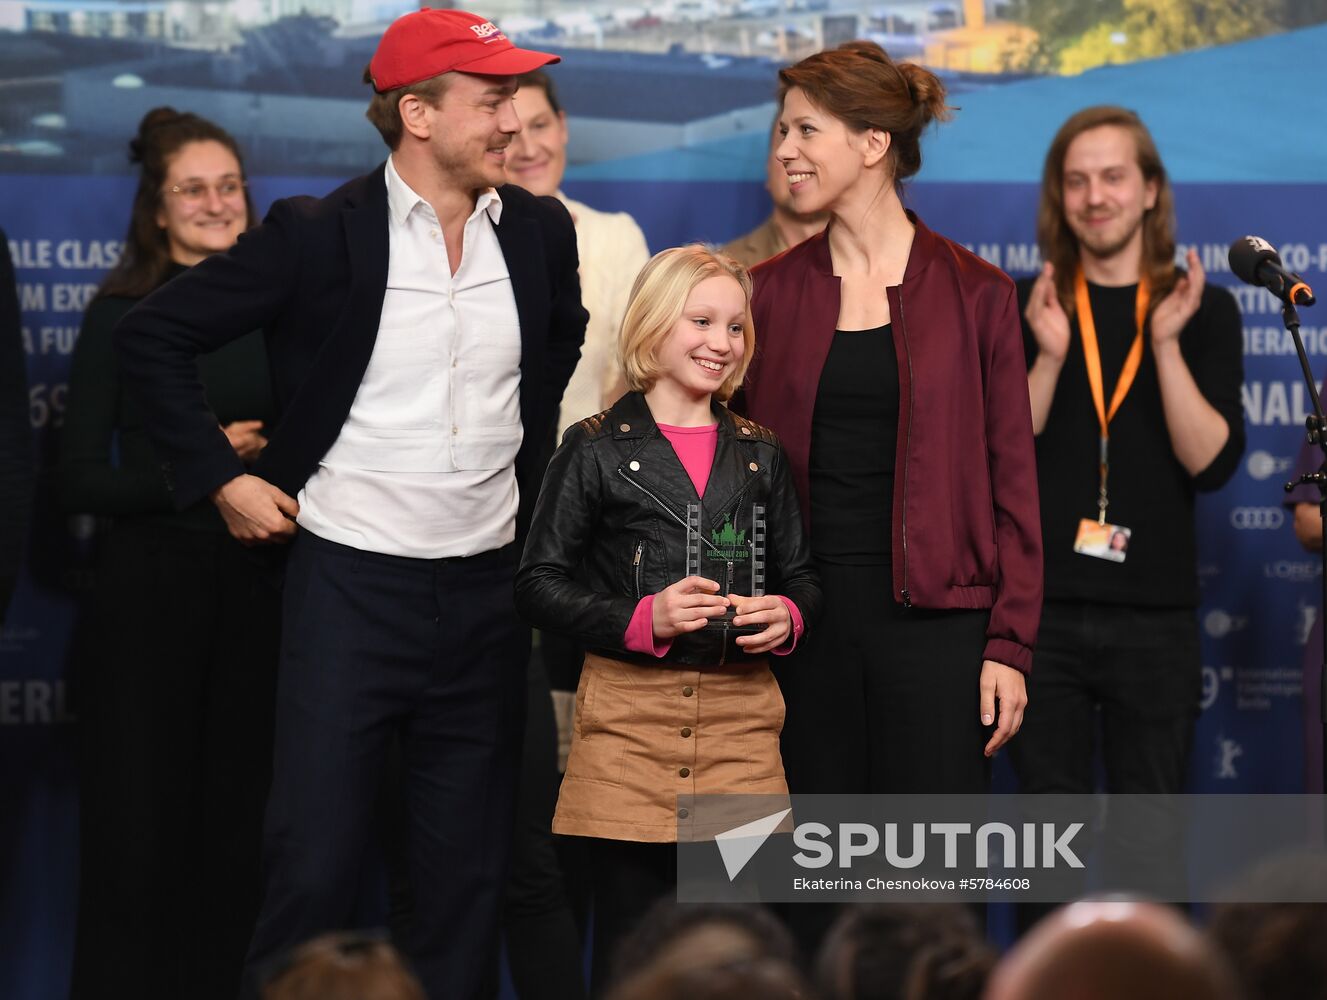 Germany Berlinale Independent Juries Awards